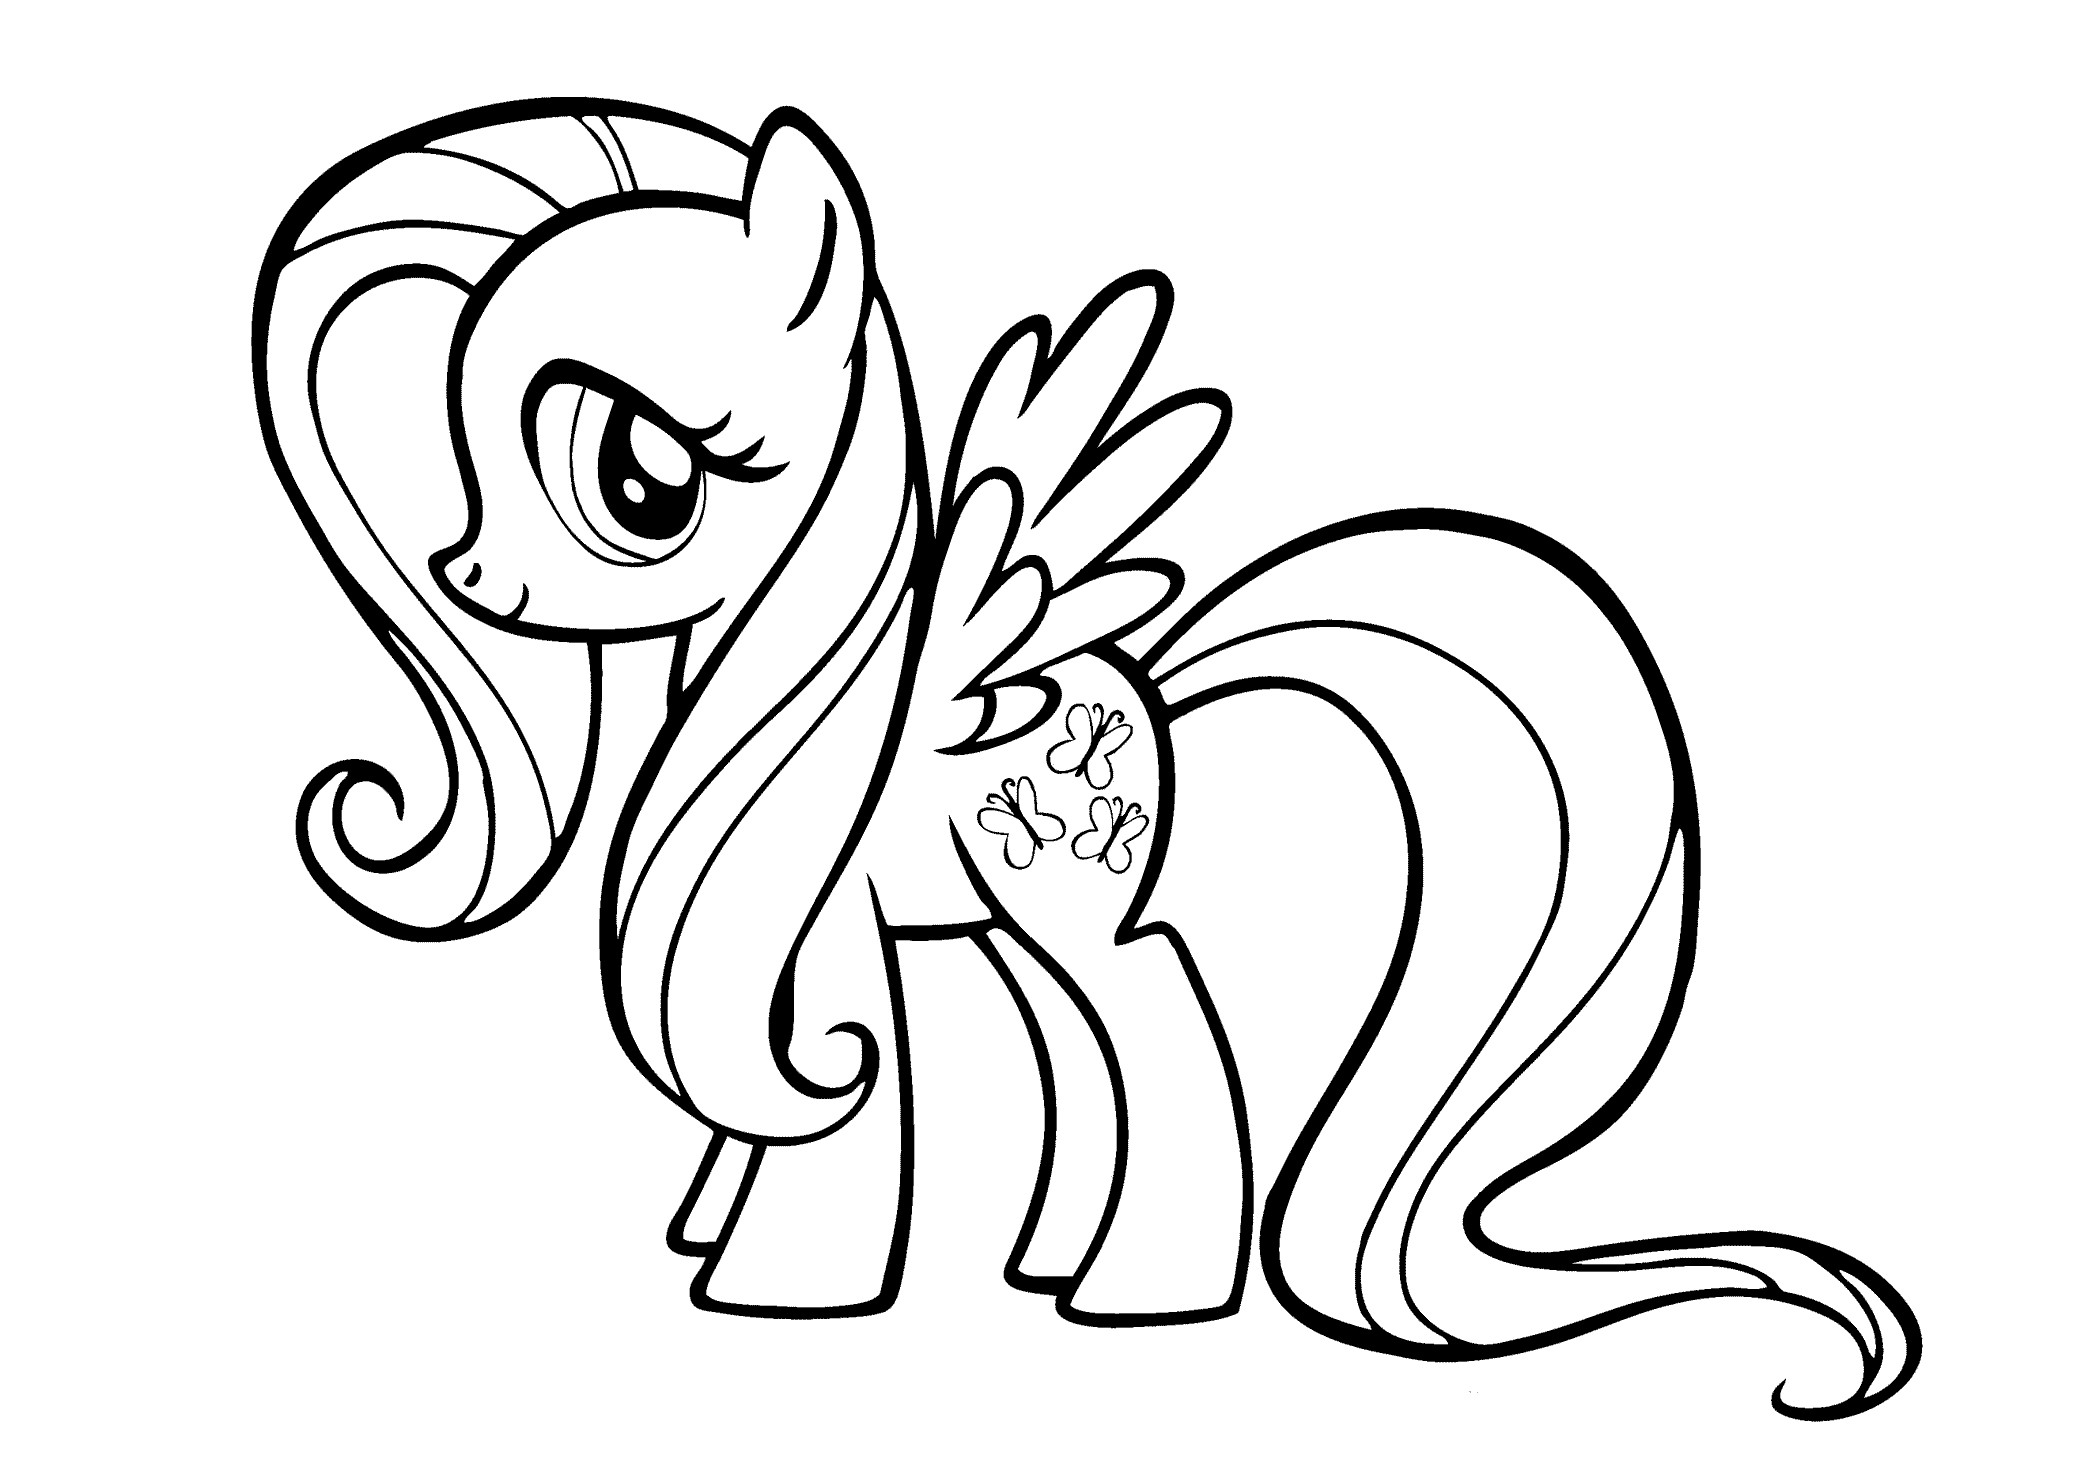 Coloring Pages For Kids My Little Pony
 My Little Pony Fluttershy coloring pages for kids